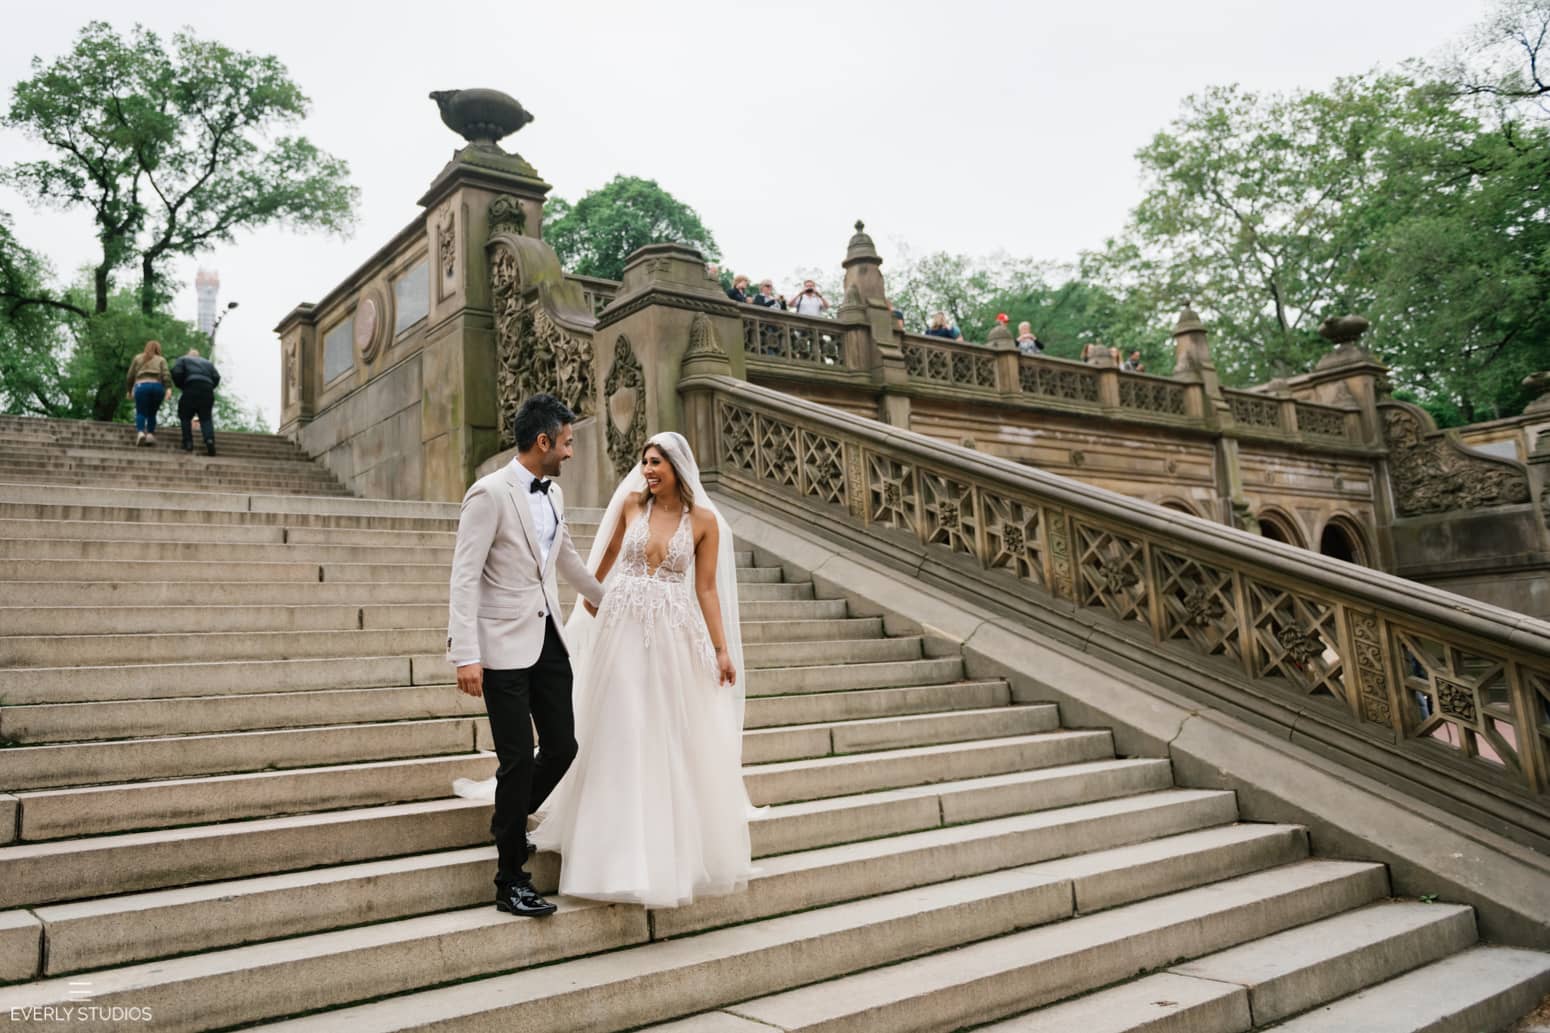 Small Central Park wedding at Bethesda Terrace and Bethesda Fountain. Photo by NYC wedding photographer Everly Studios, www.everlystudios.com